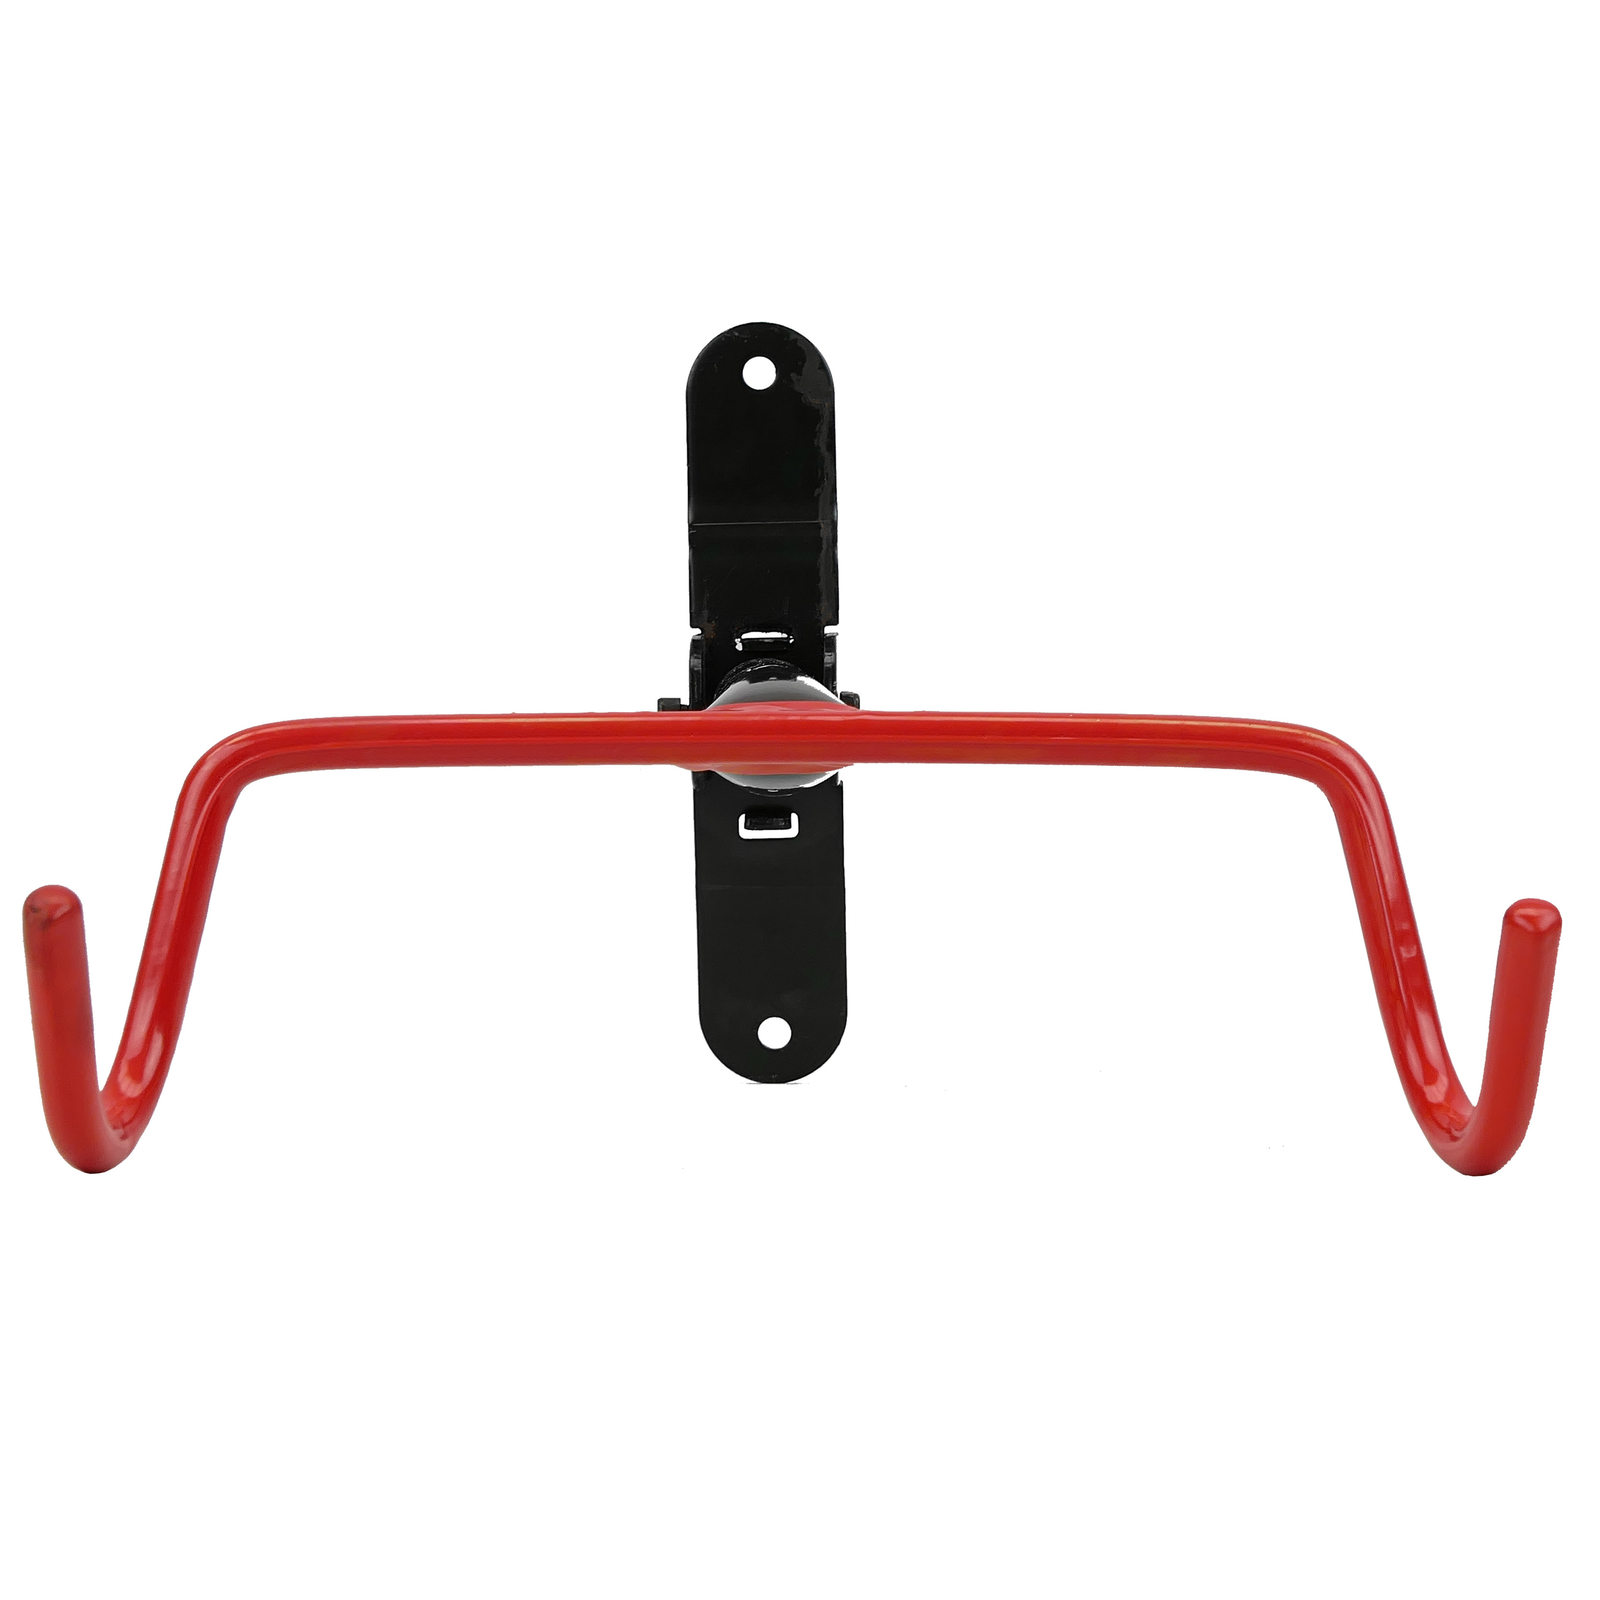 Universal wall hanger for bike carriers max load 50 kg wall bracket 110x50 mm 